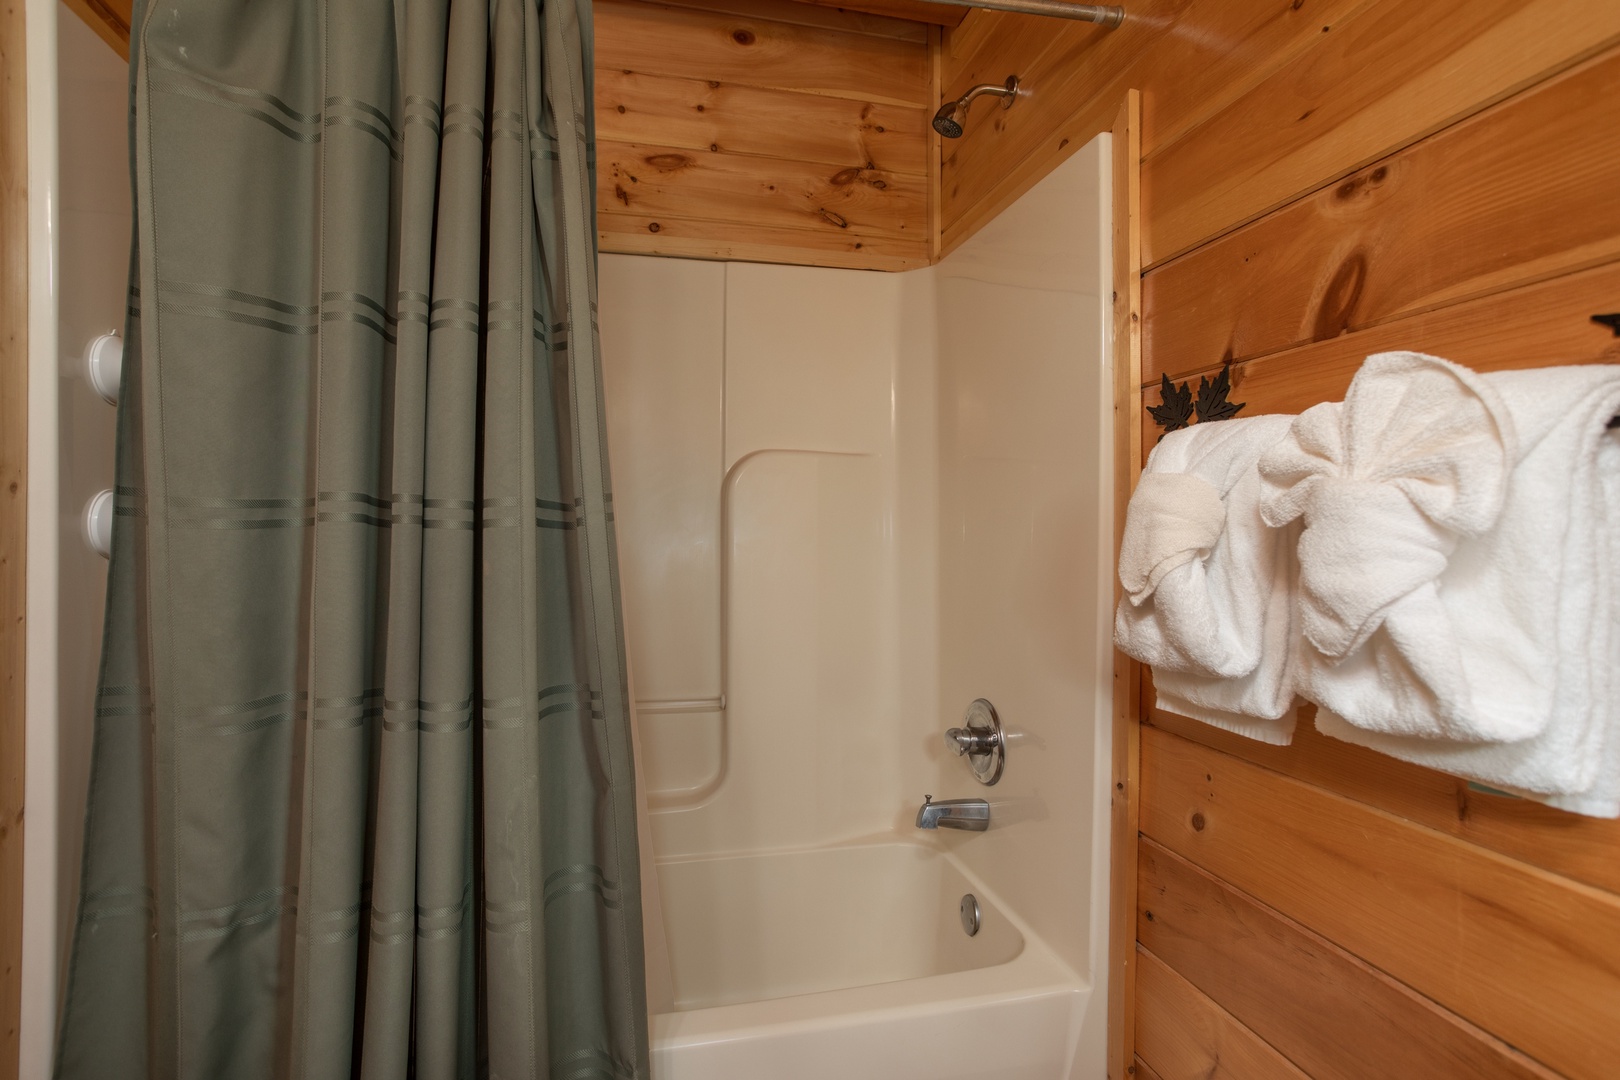 Tub and shower in a bathroomat Better View, a 4 bedroom cabin rental located in Pigeon Forge